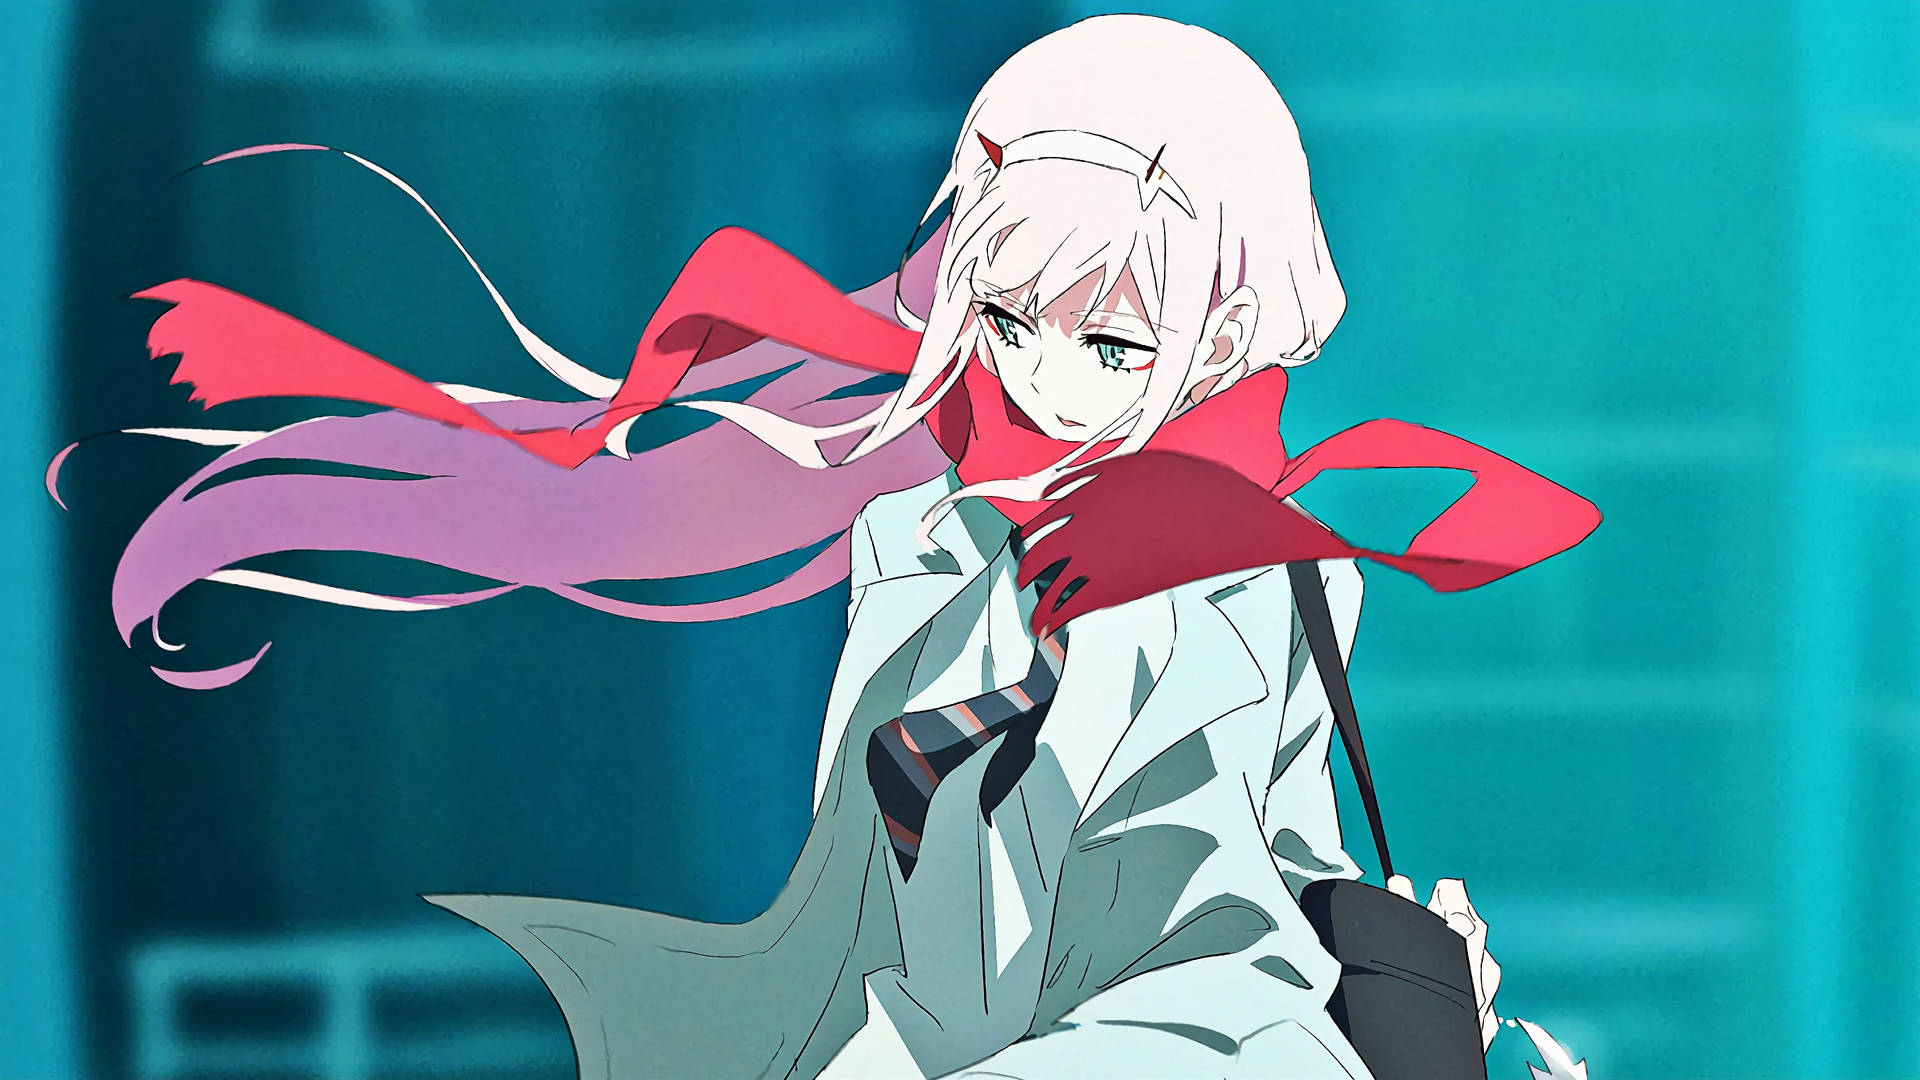 Zero Two, The Protagonist From The Anime Darling In The Franxx Background